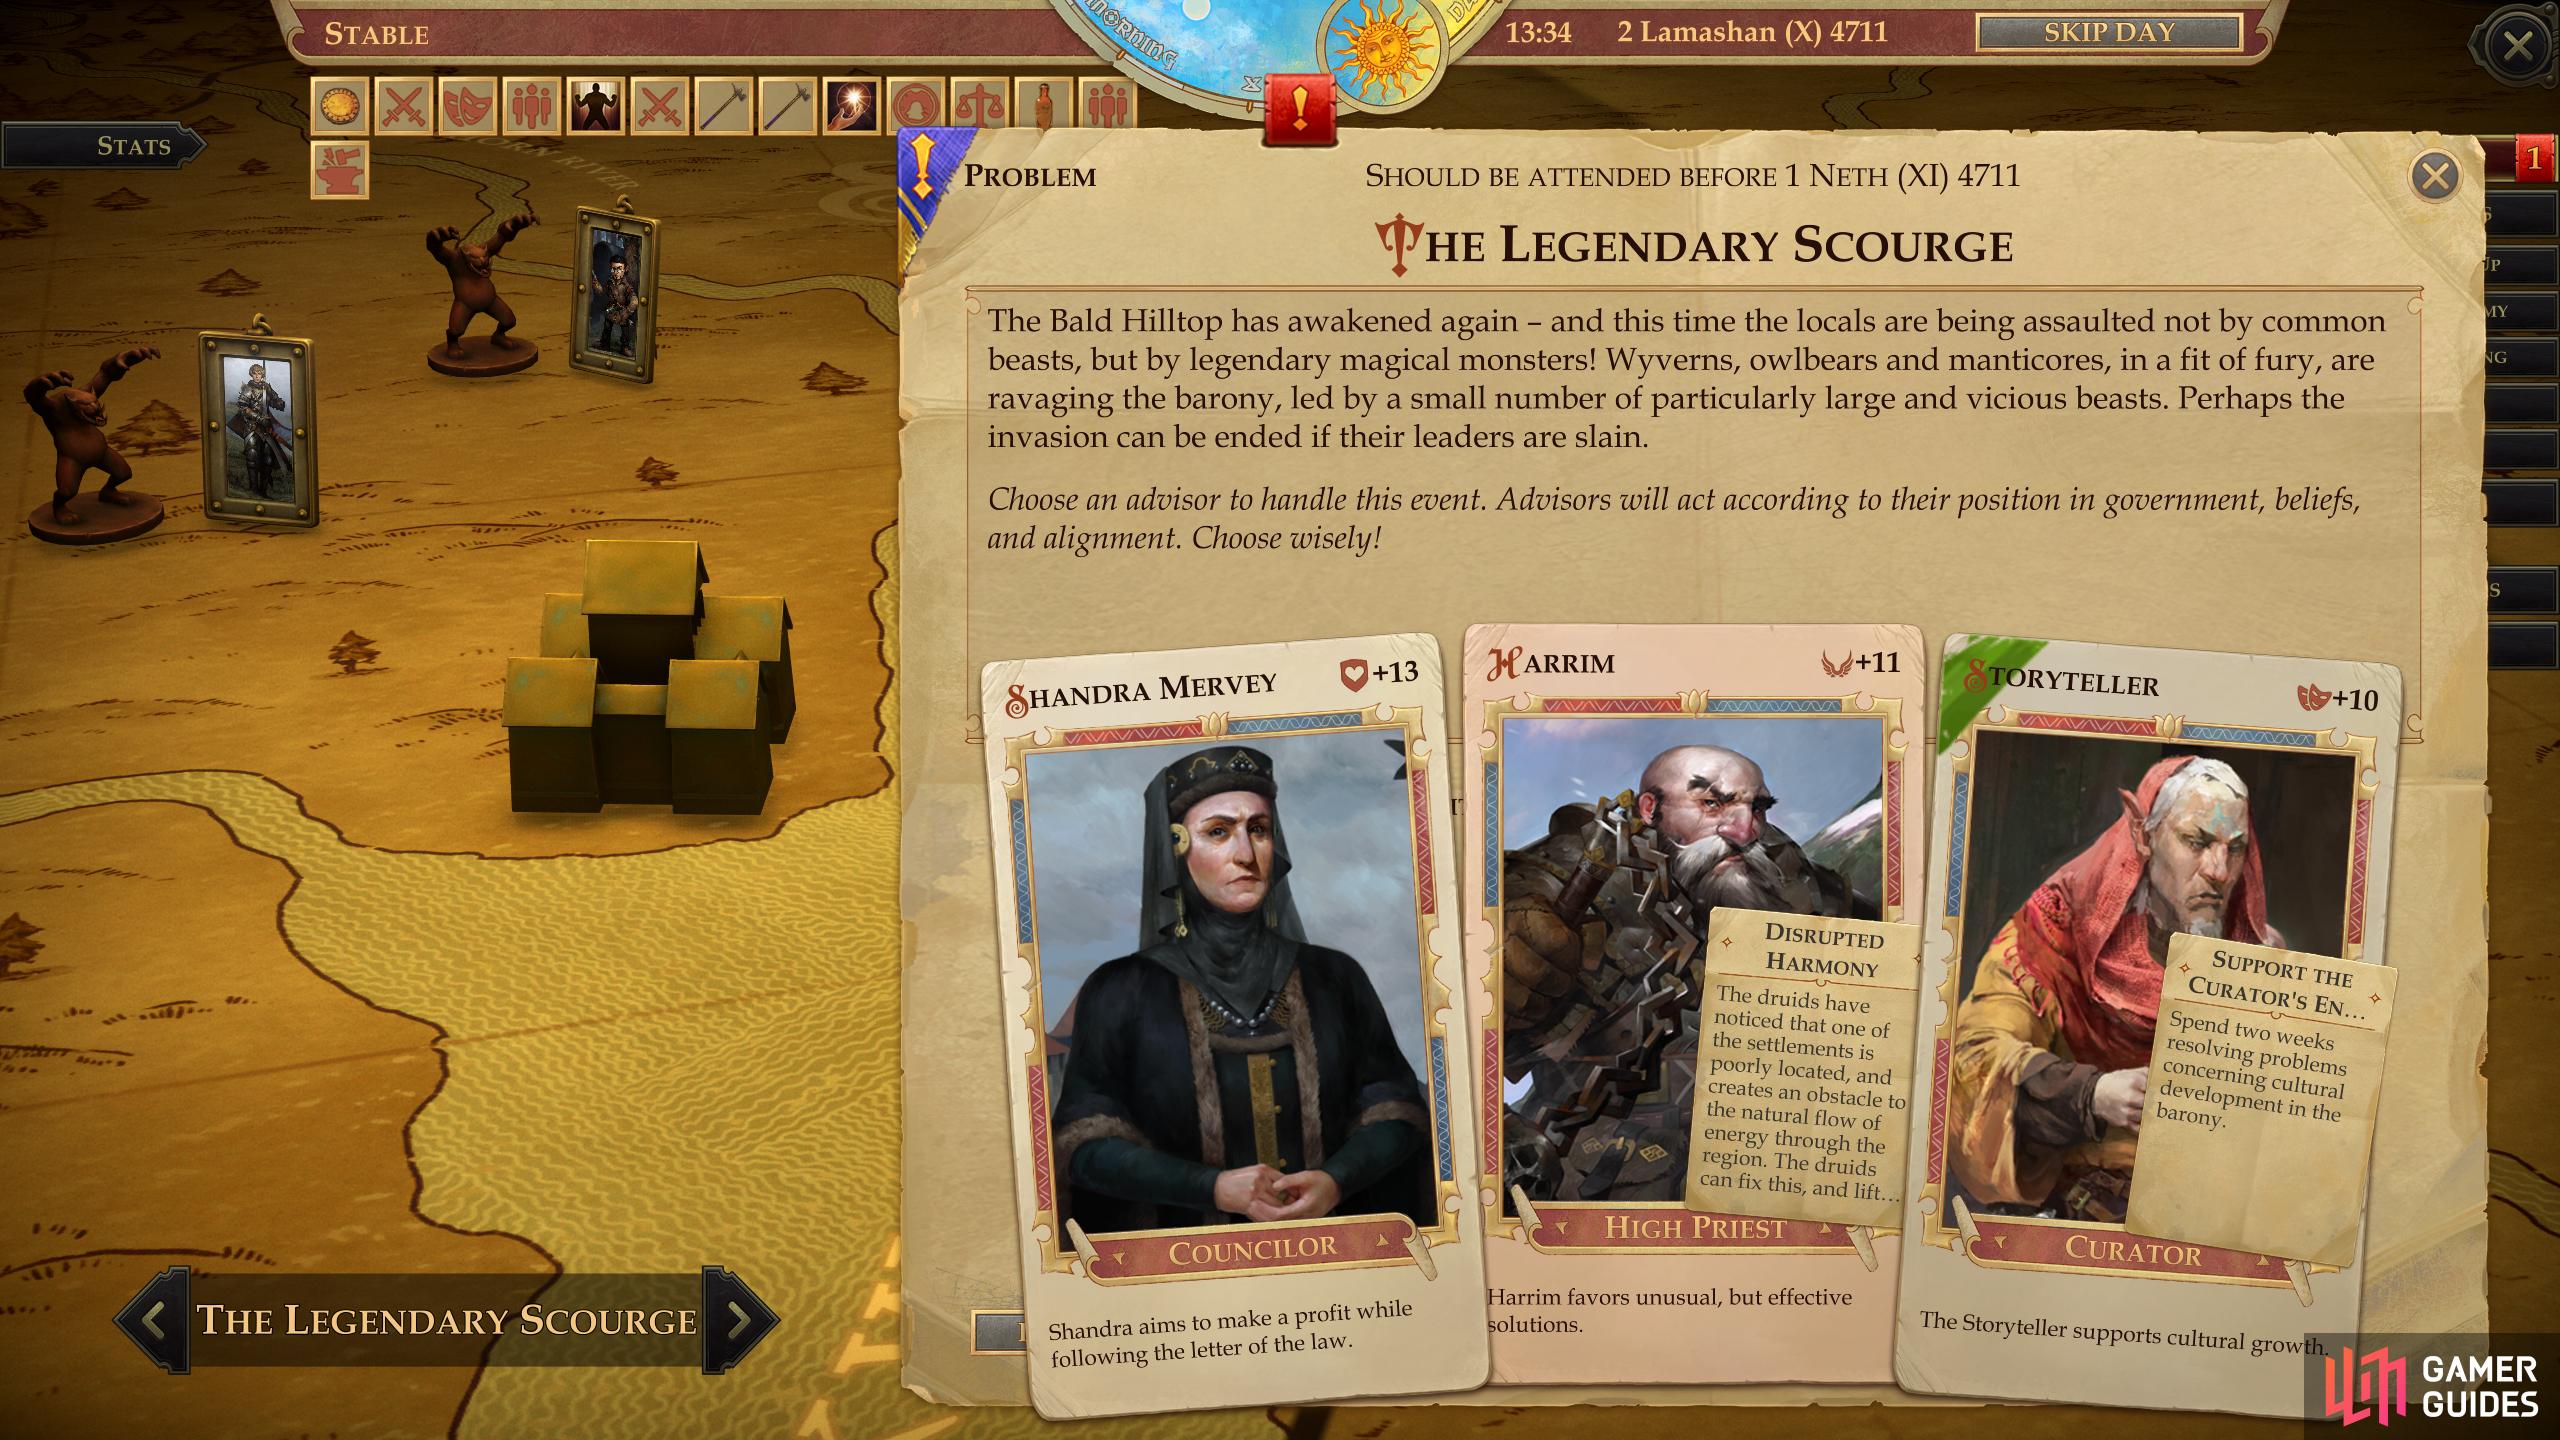 Deal with "The Legendary Scourge" as quickly as possible to avoid Kingdom Stat loss.